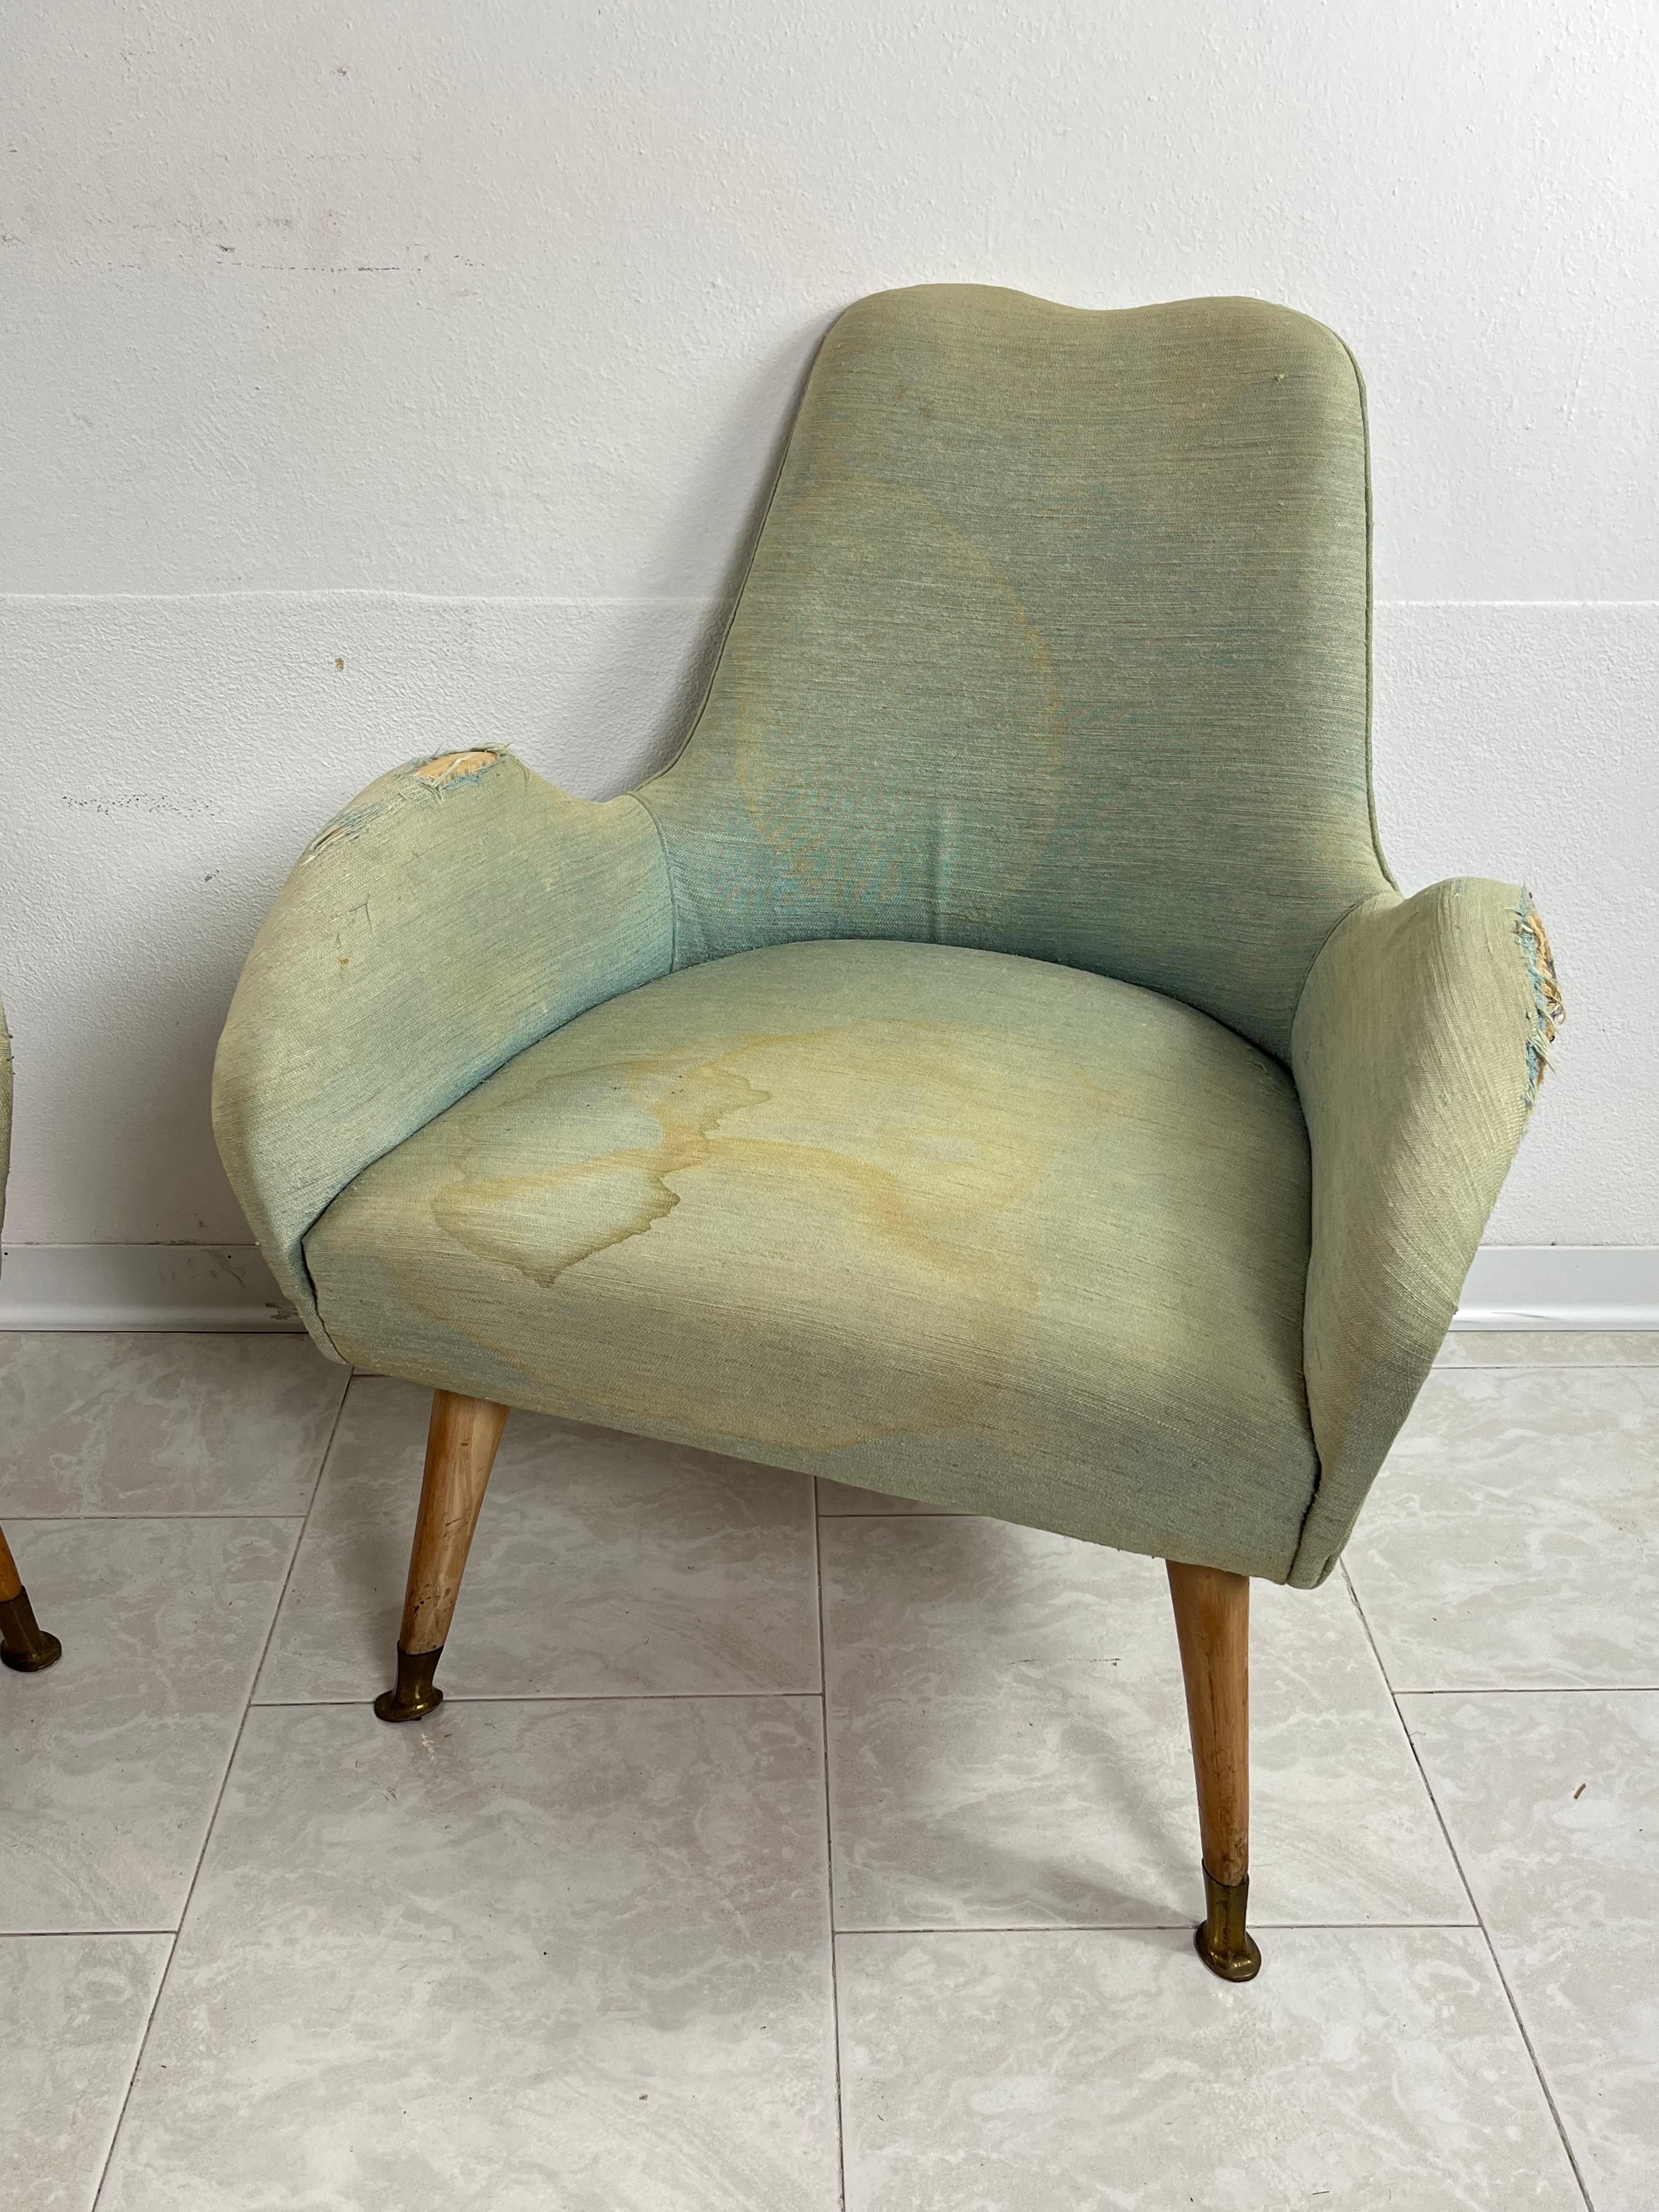 Pair of Mid-Century Armchairs Attributed To Federico Munari 1950s In Good Condition For Sale In Palermo, IT